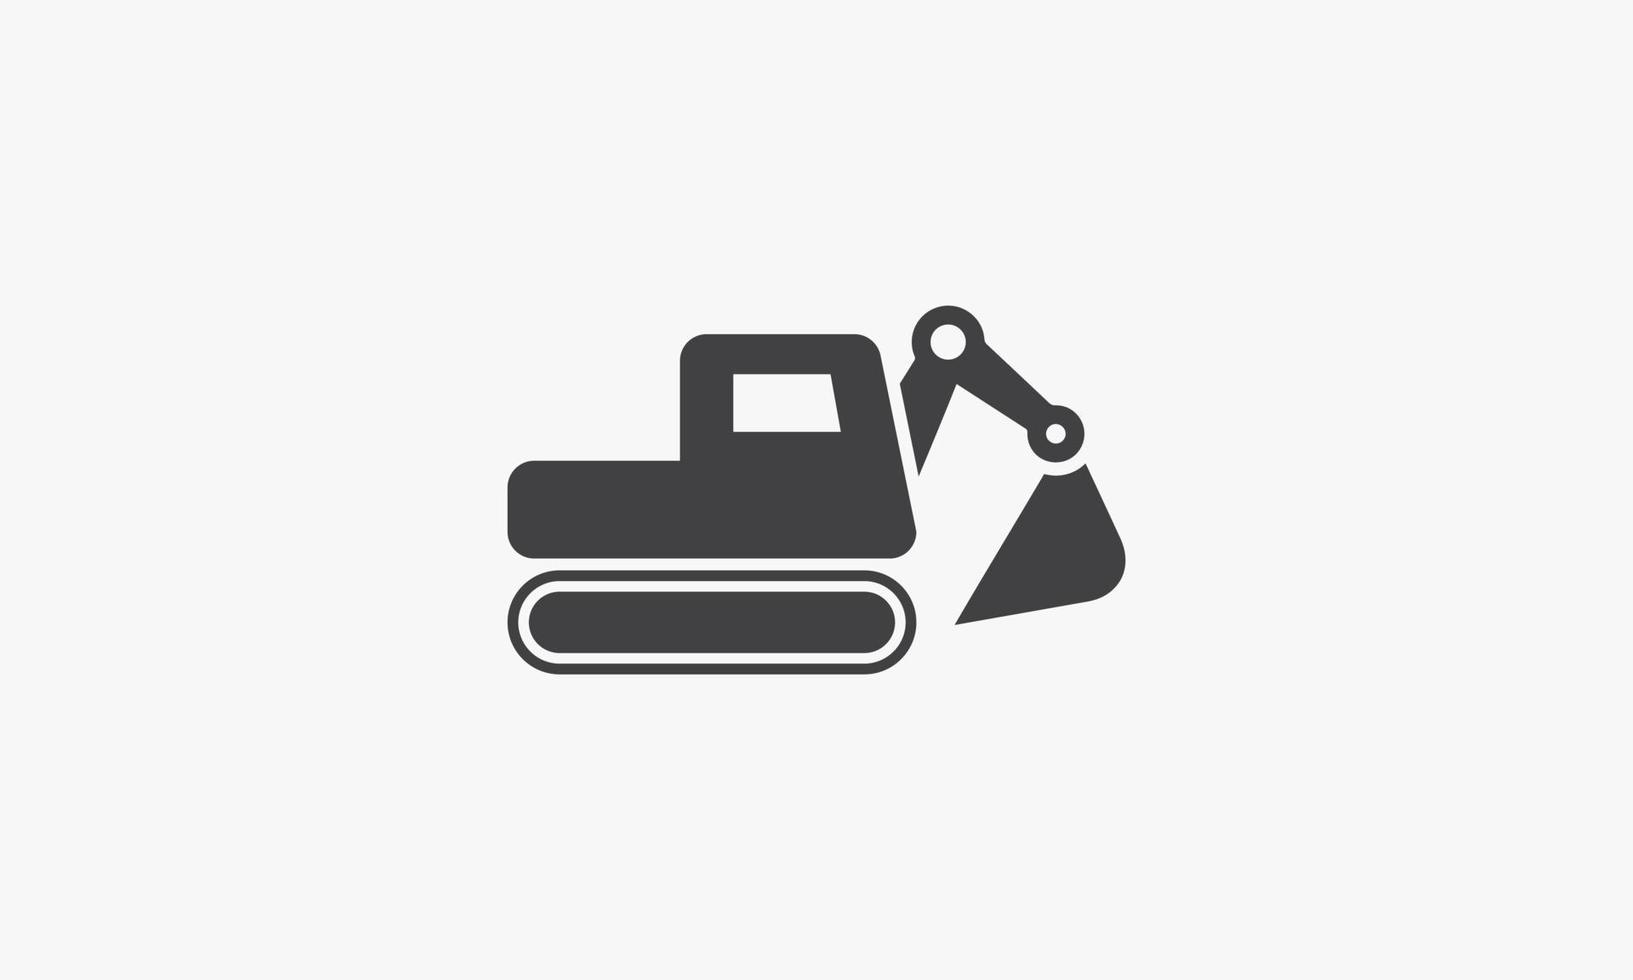 excavator digger icon design flat vector illustration. isolated on white background.